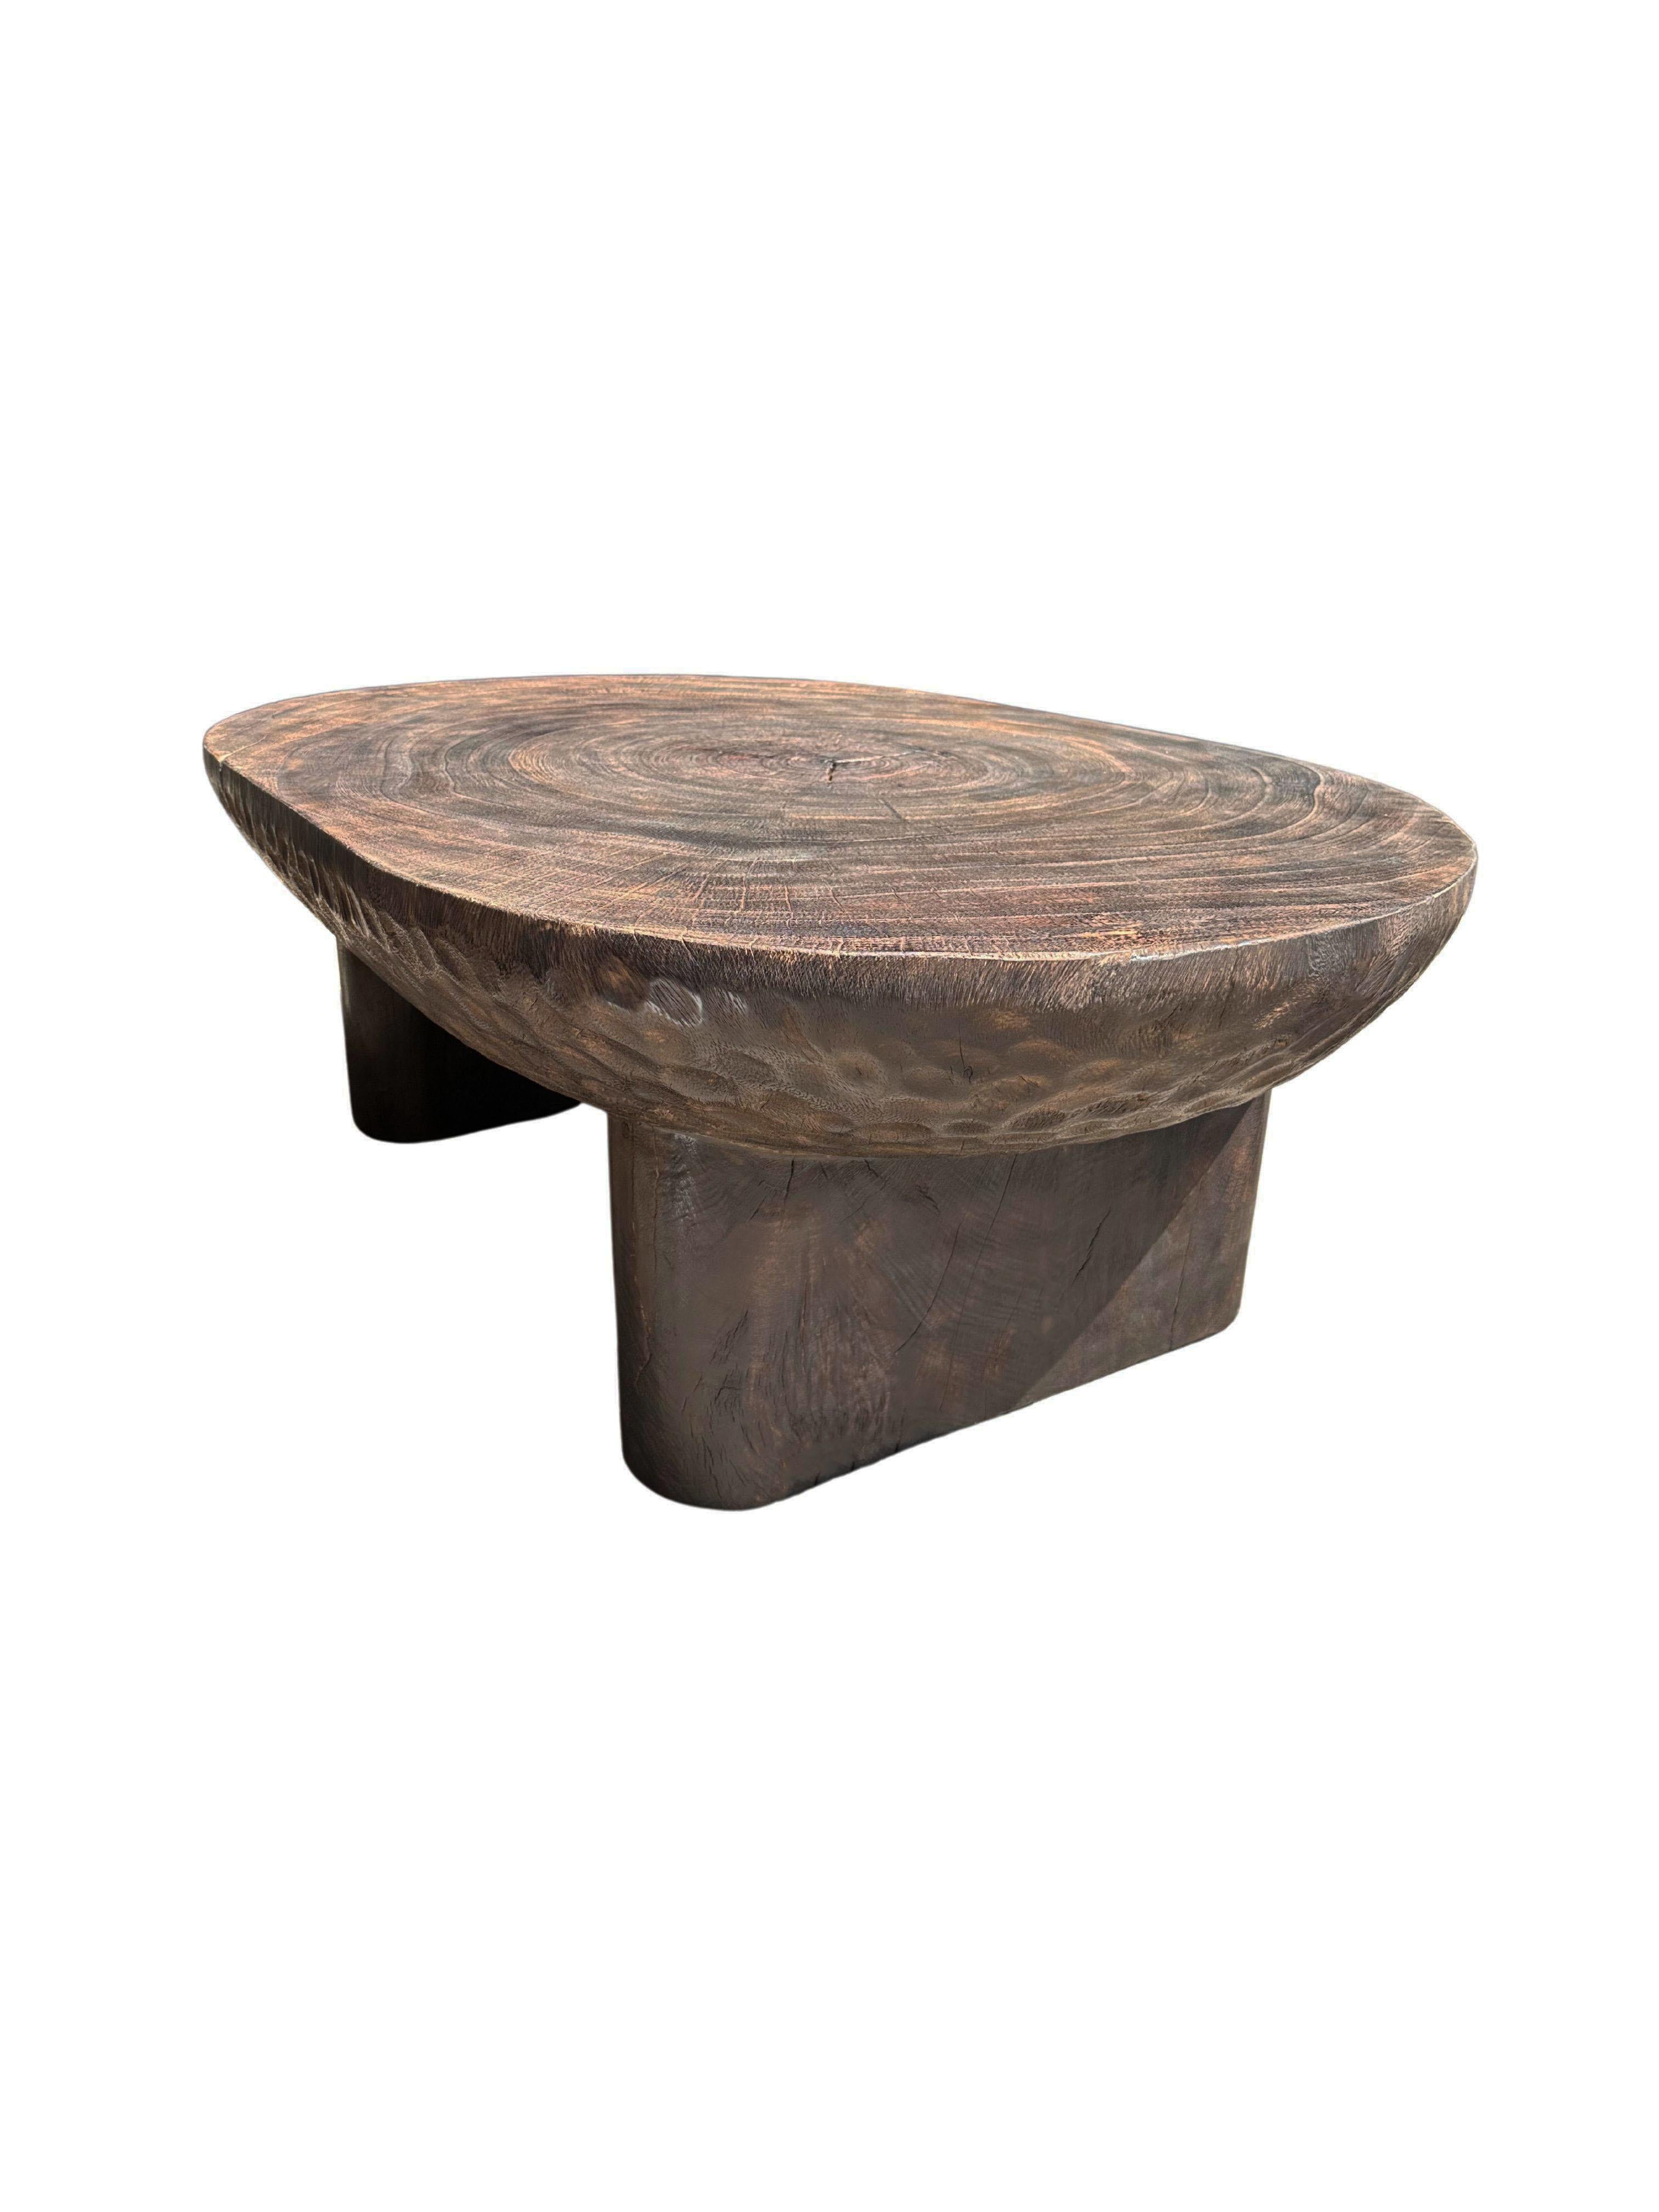 A wonderfully sculptural table crafted from suar wood. To achieve its pigment the wood was burnt numerous times and then finished with a clear coat. The mix of wood textures and shades adds to its charm. The table top was crafted from a single slab